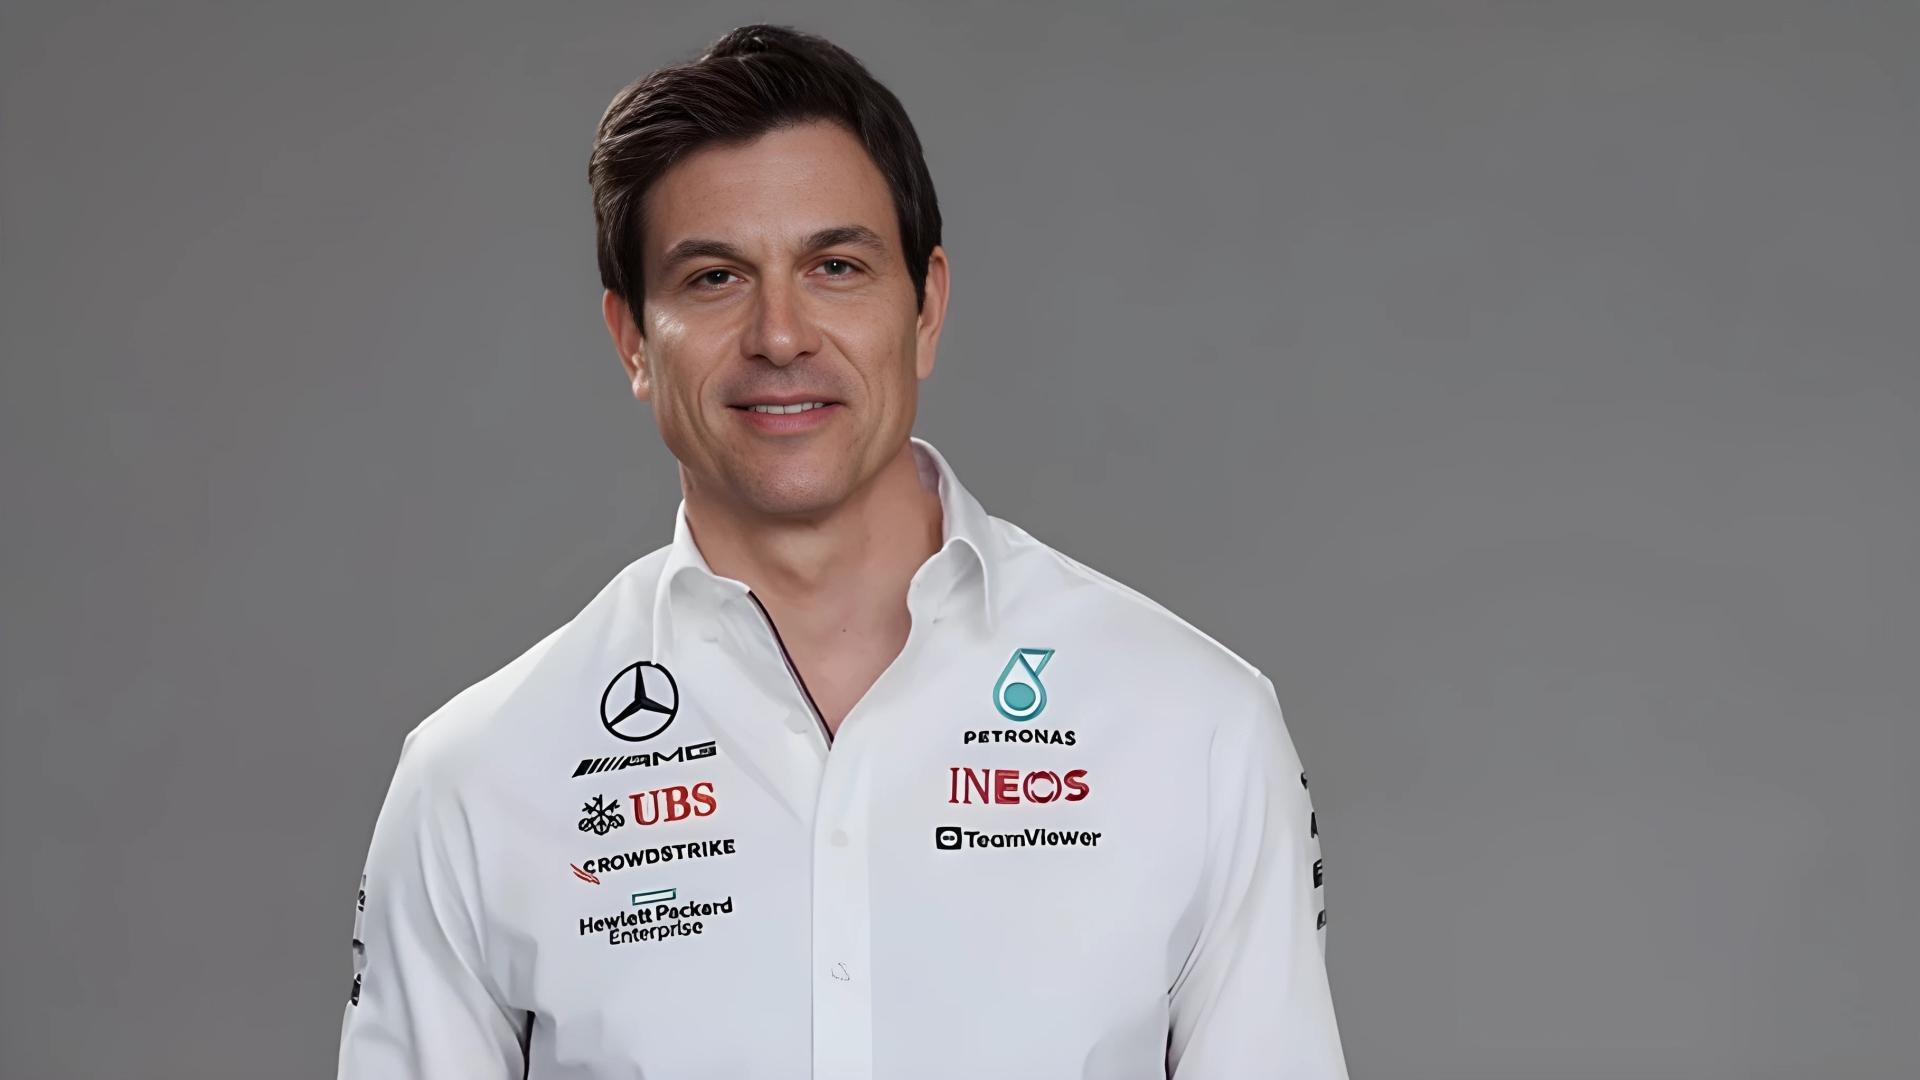 Team Principal & CEO of the Mercedes-AMG PETRONAS F1 Team, Toto Wolff